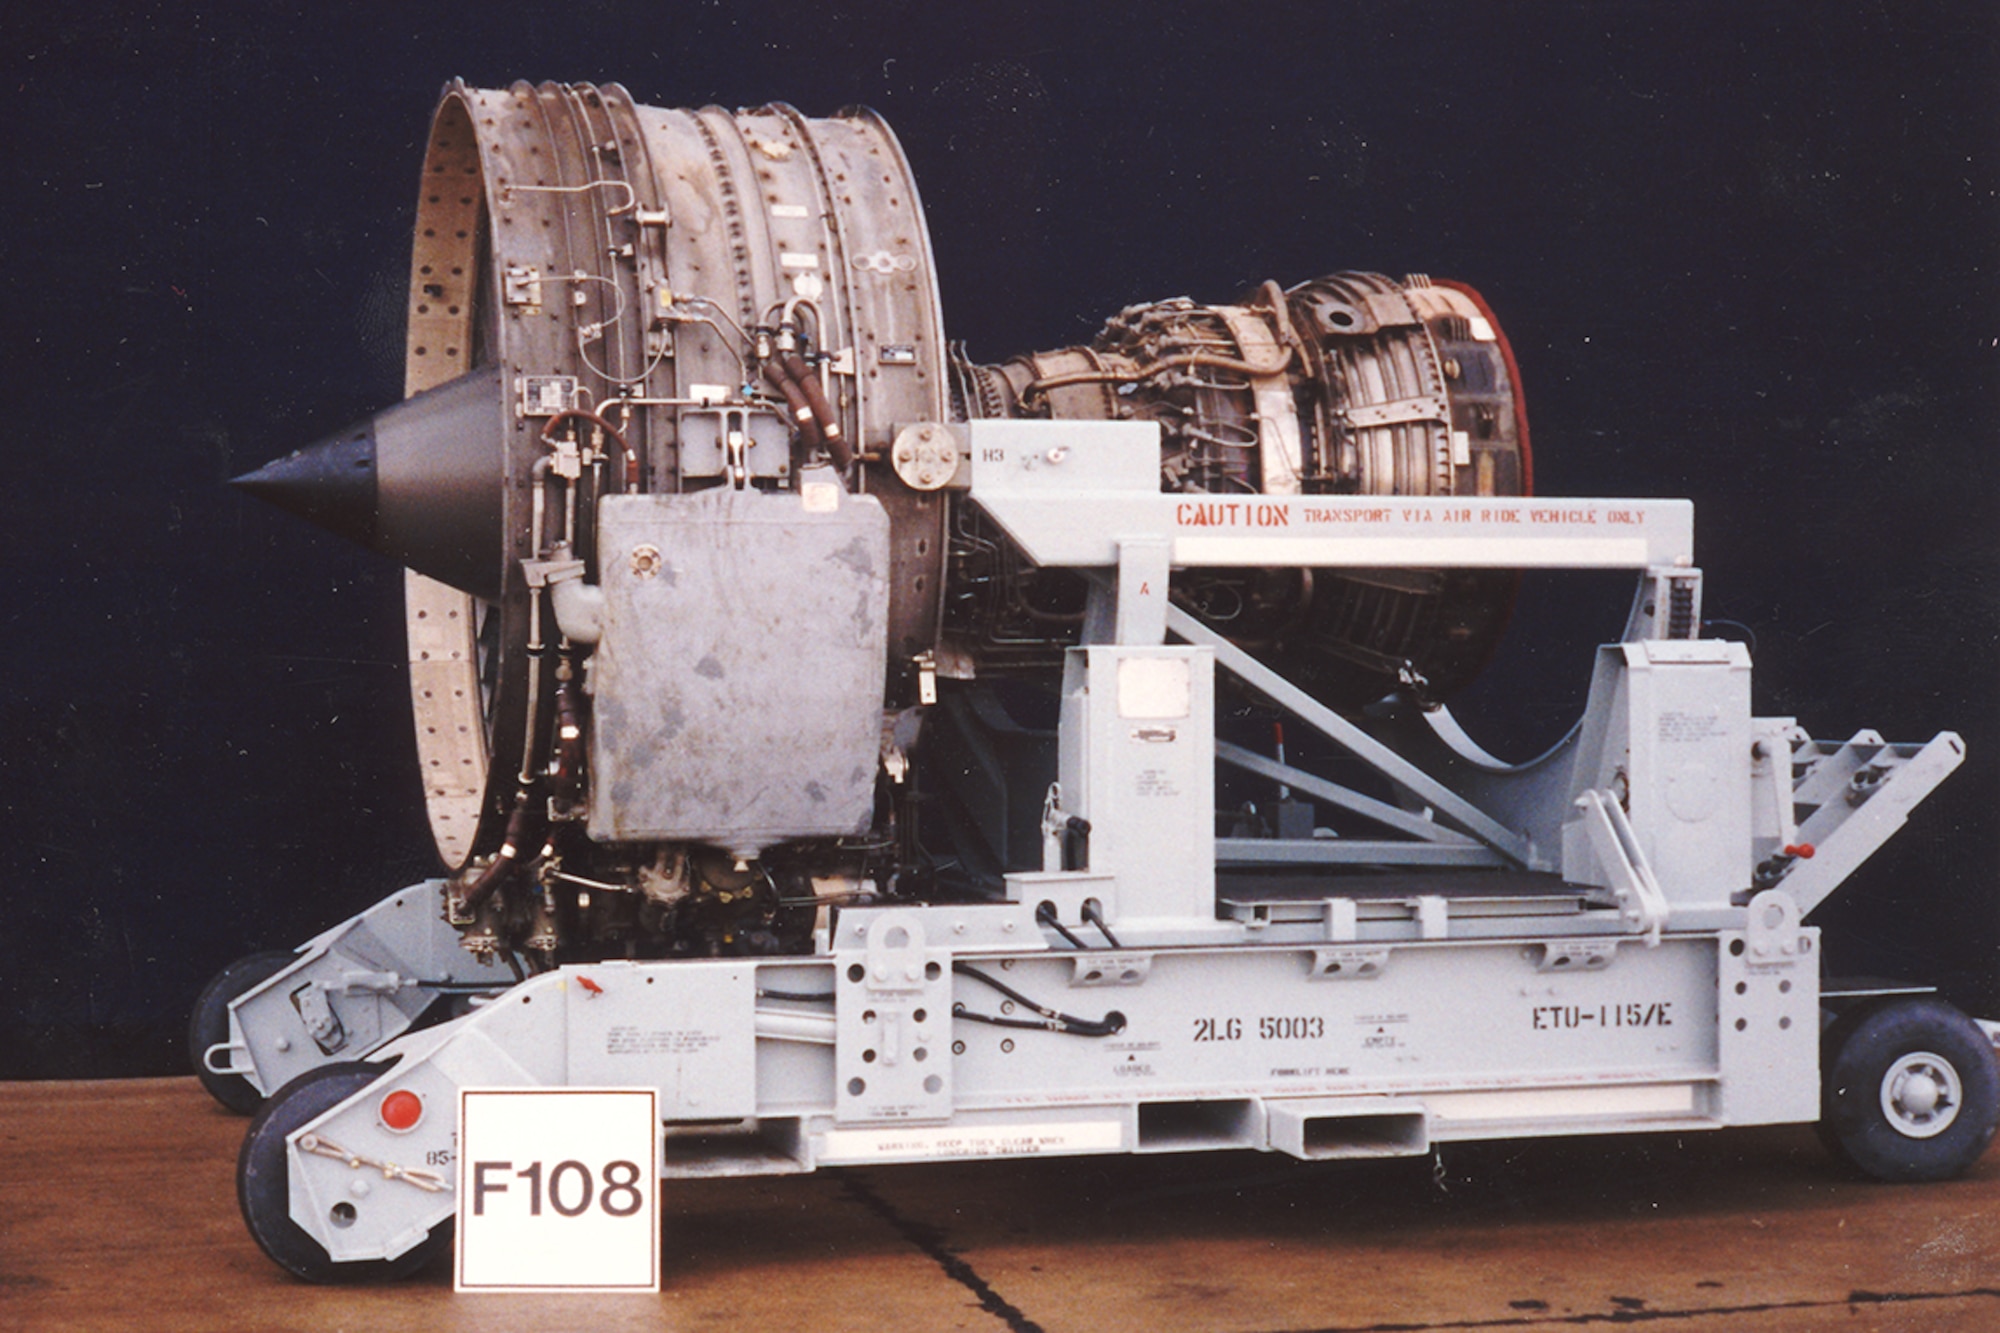 The military derivative of the CFM56 engine is designated F108 and powers U.S. military aircraft such as the KC-135R Stratotanker, RC-135 family of reconnaissance aircraft and the Navy’s E-6B Mercury. (Photo courtesy of Tinker History Office)